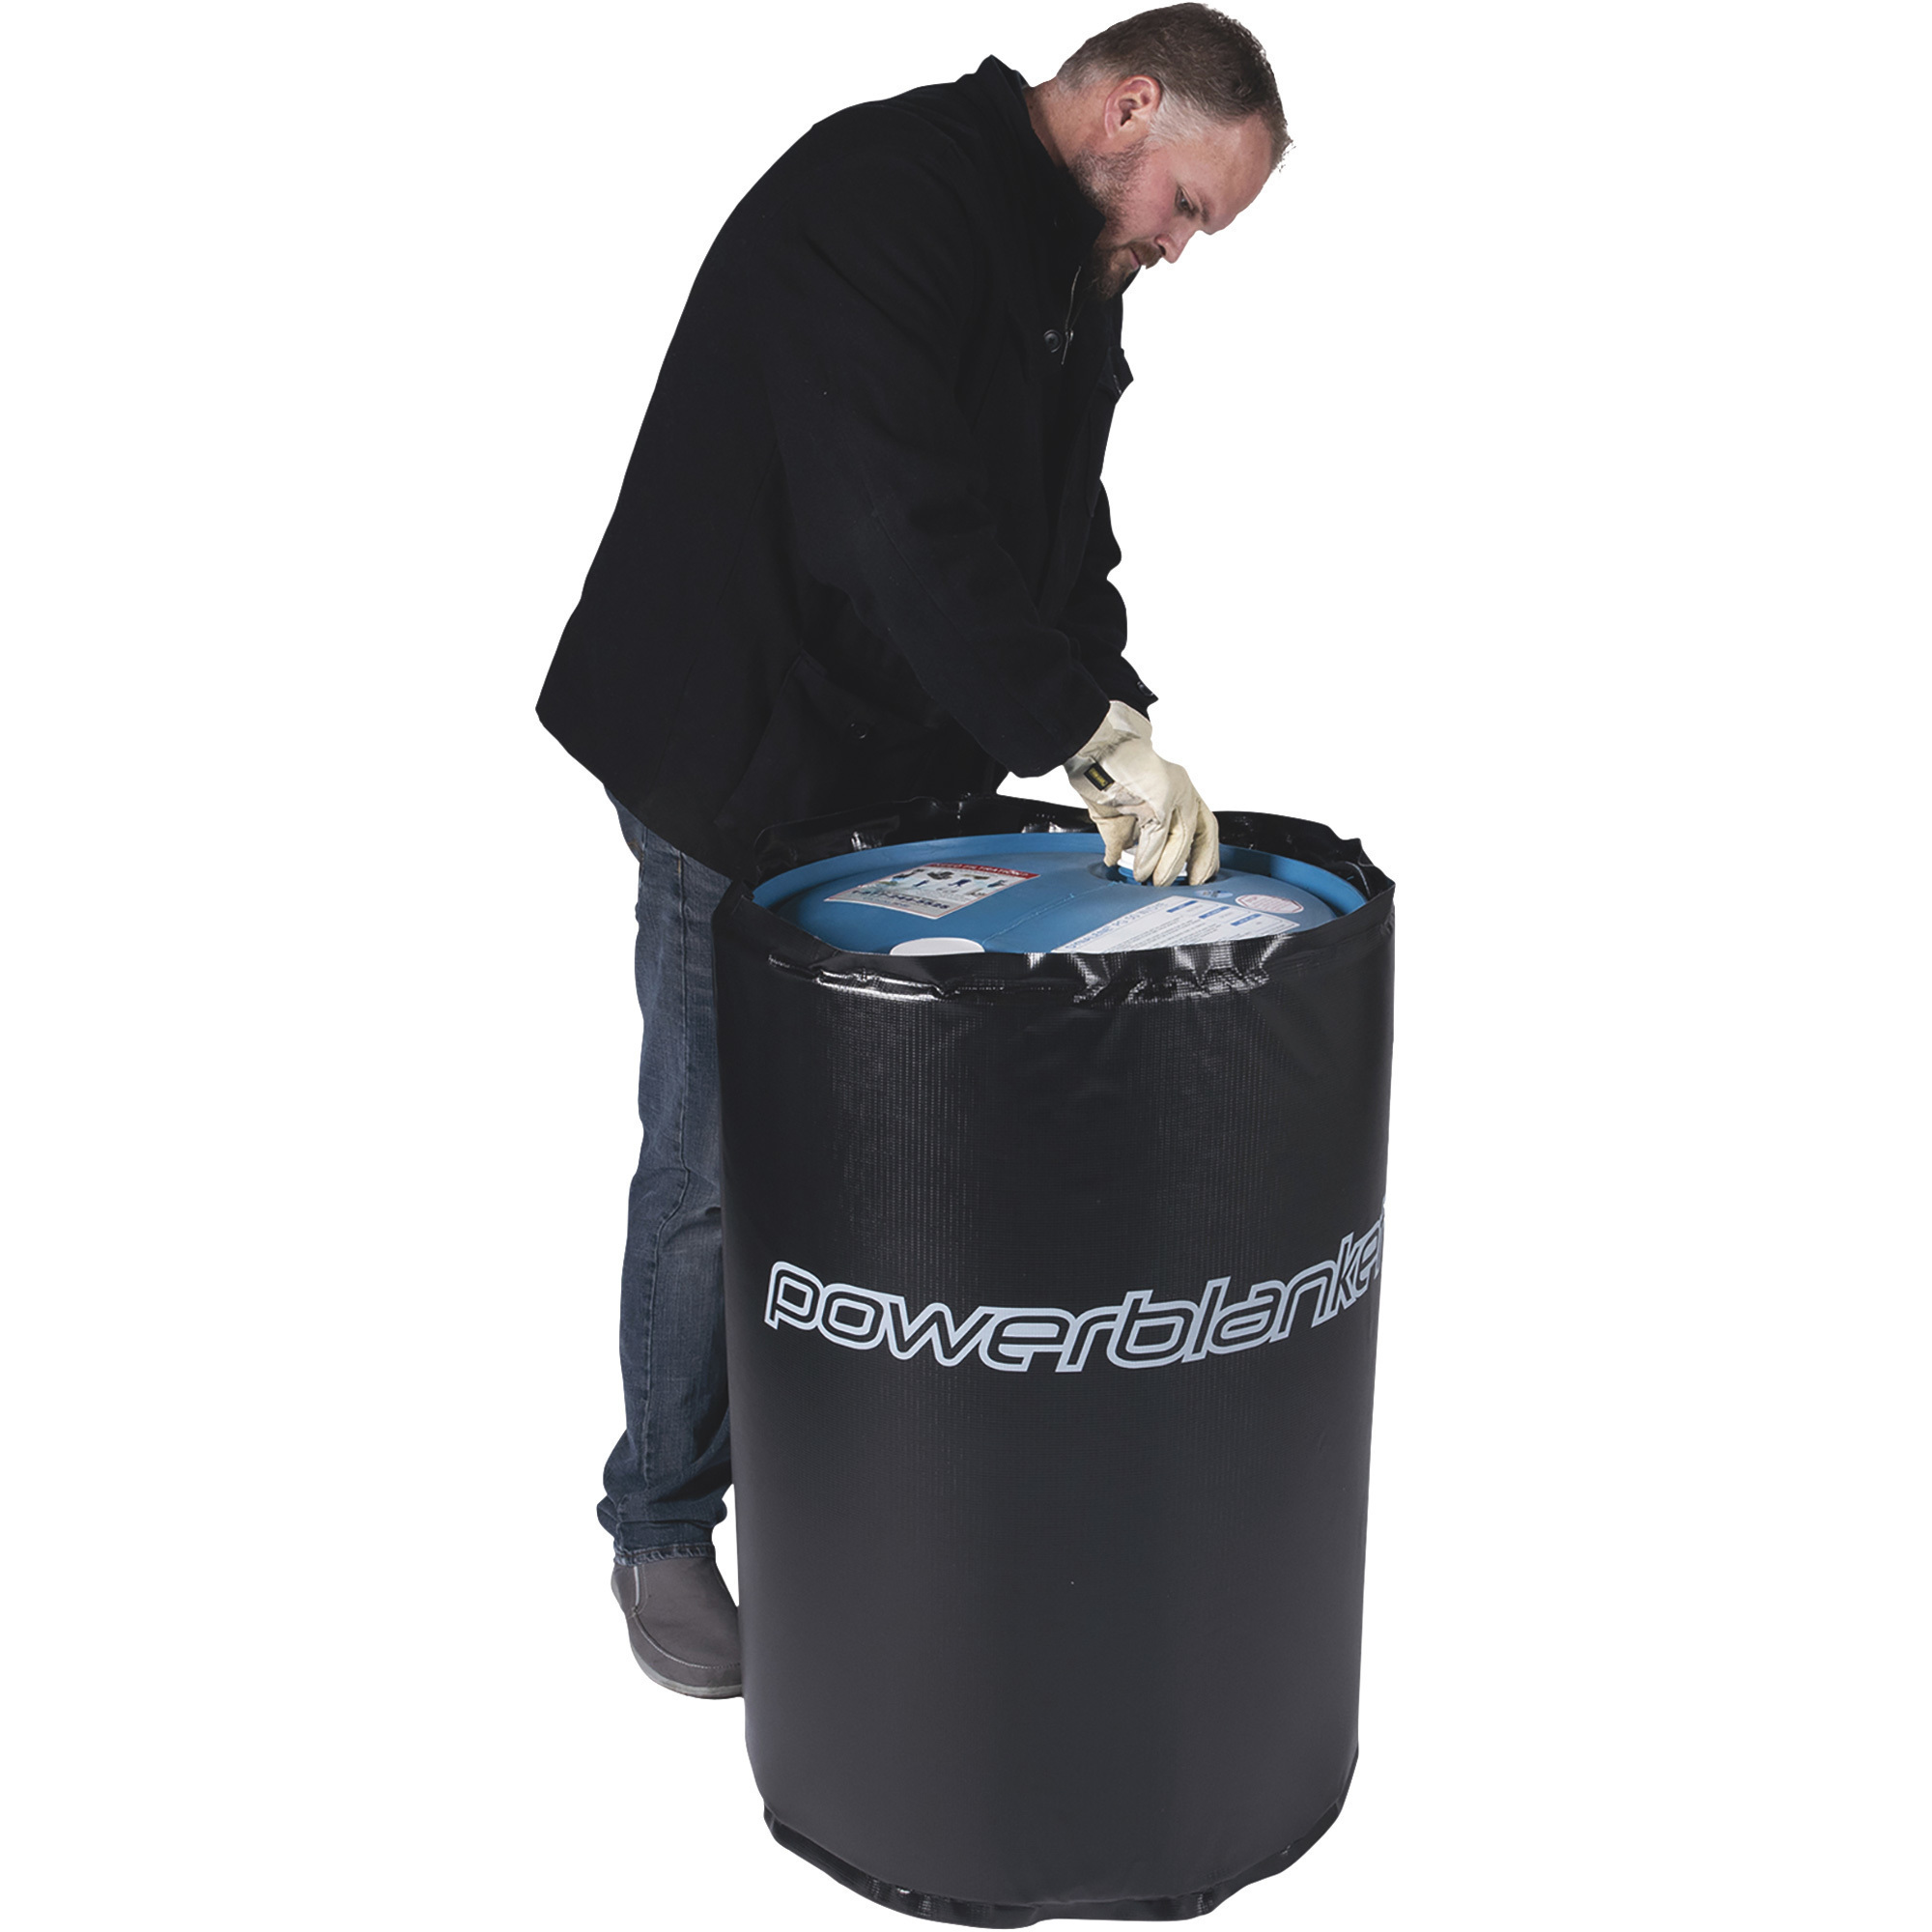 Powerblanket 55-Gallon Insulated PRO Drum Heater/Barrel Blanket — Includes  Adjustable Thermostat, 780 Watts, 120 Volt, Model# BH55PRO